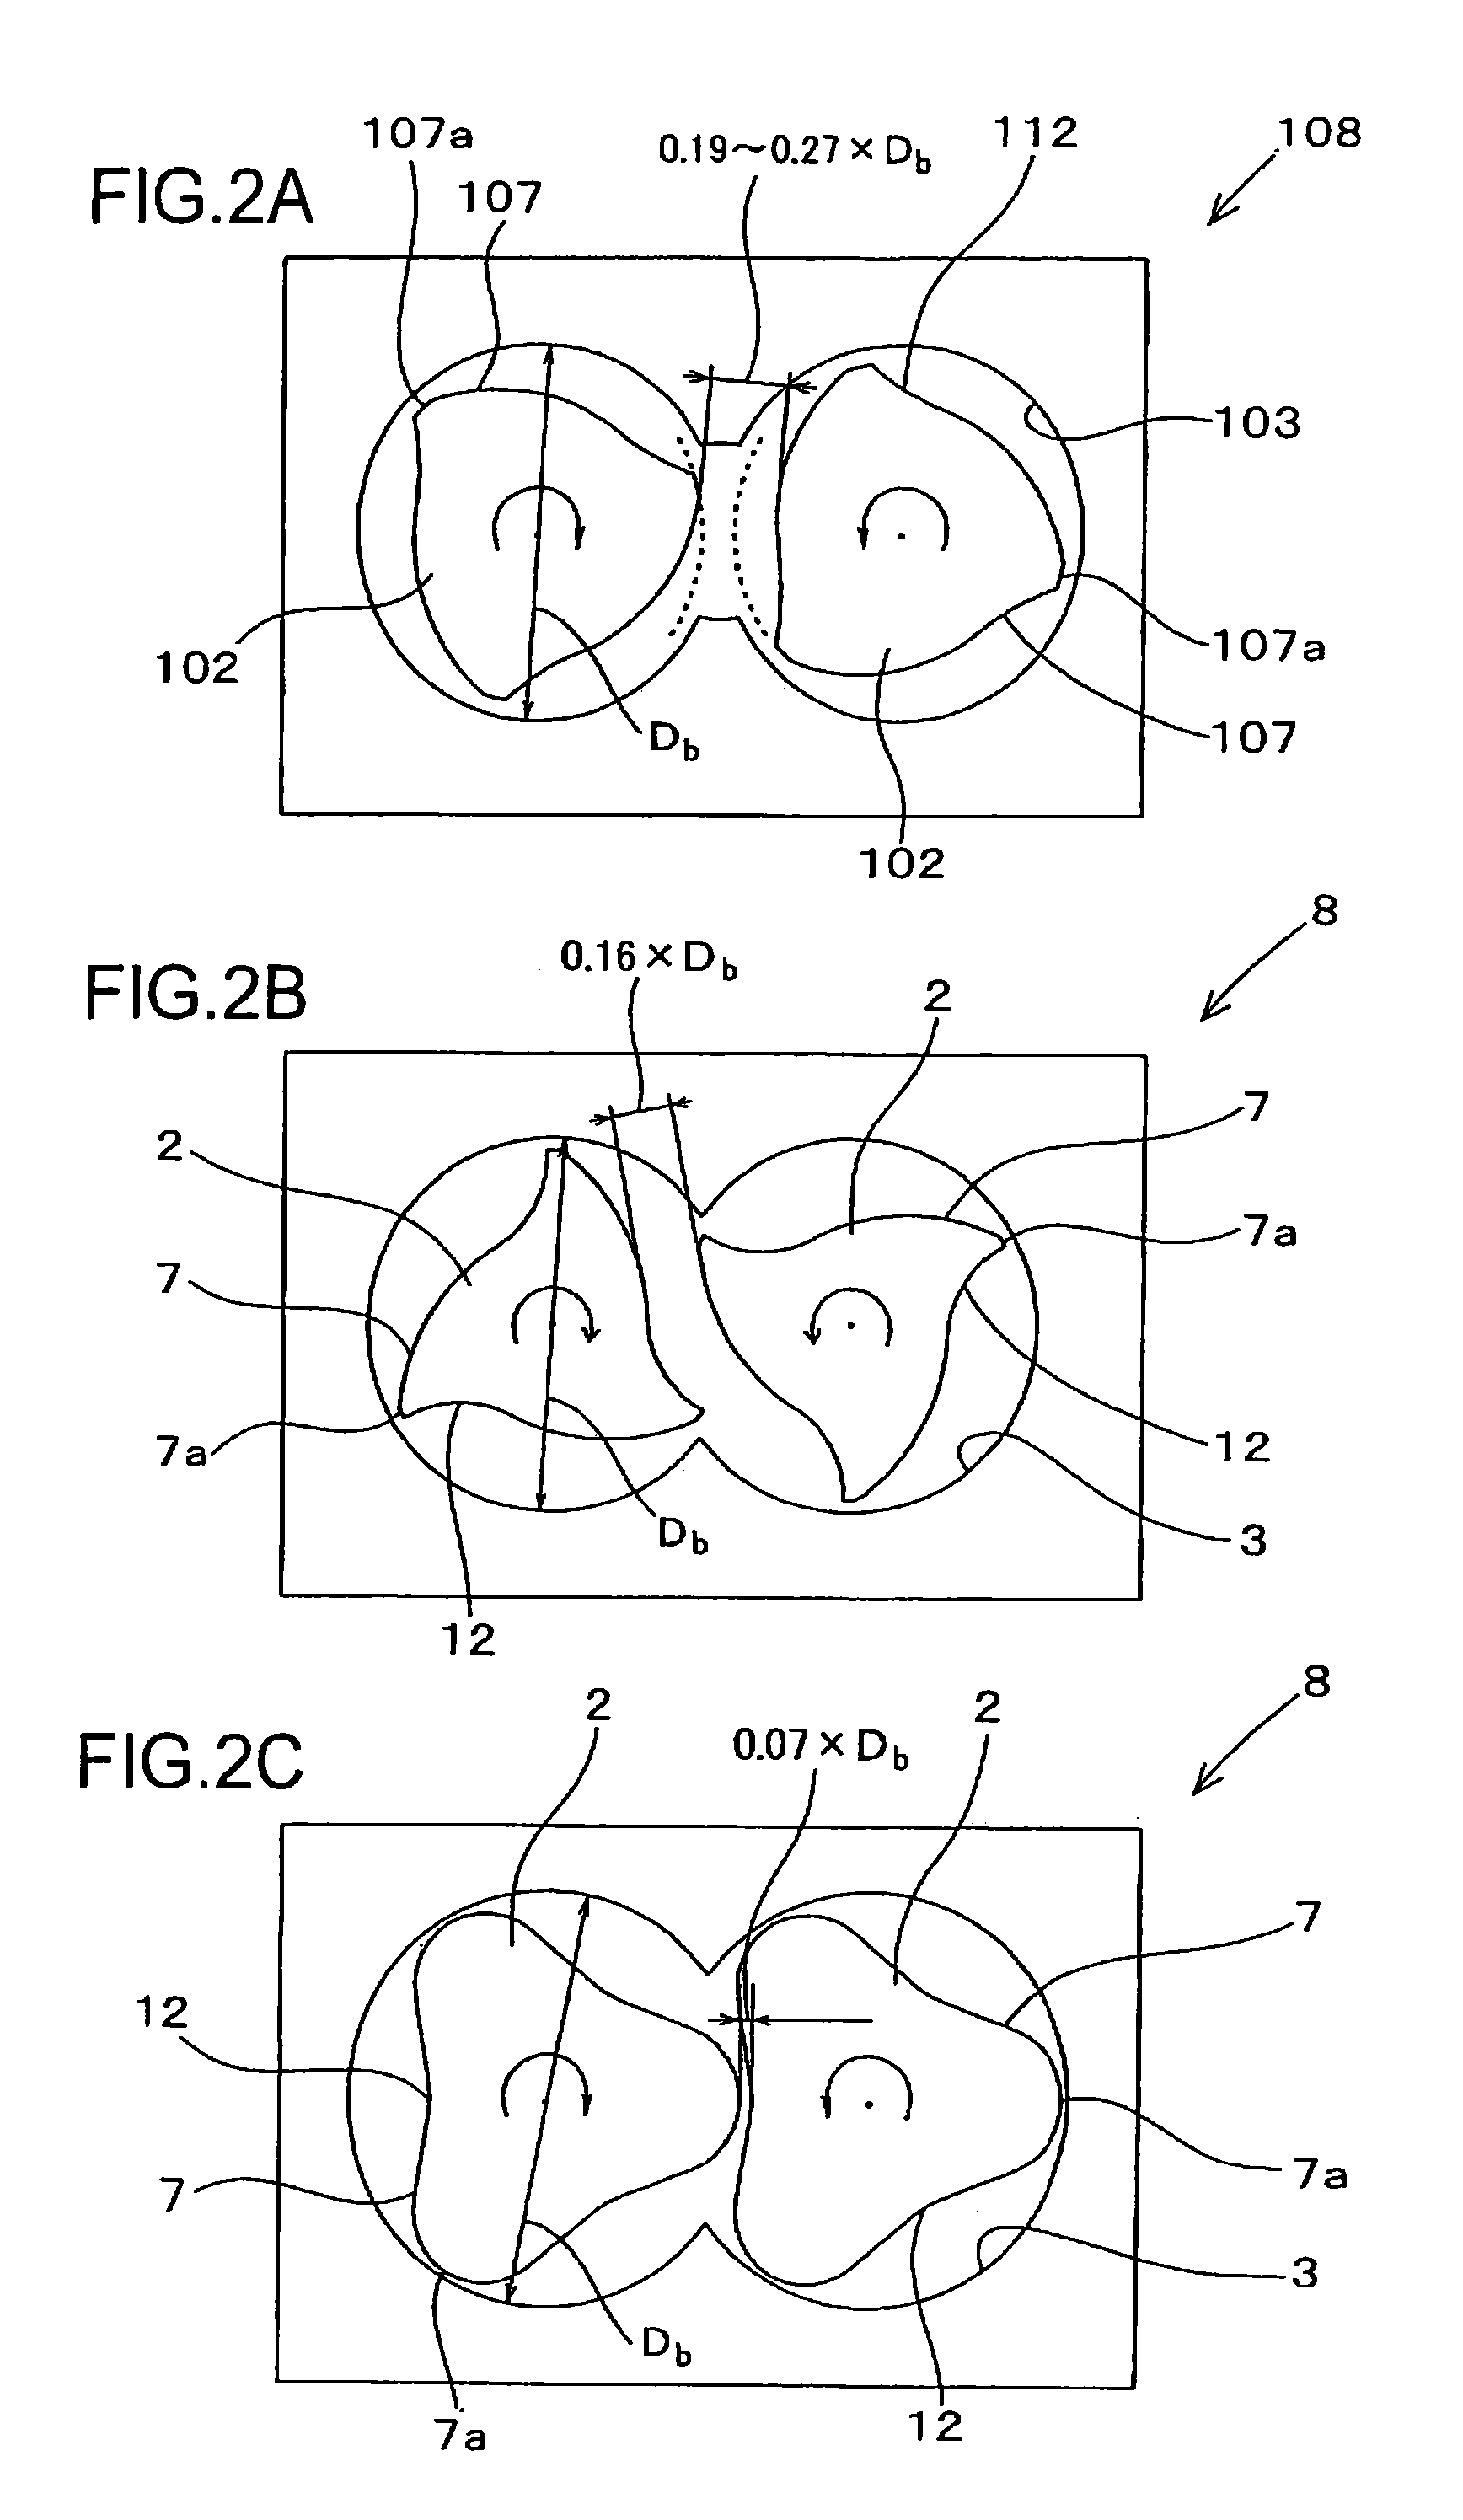 Continuous mixer and mixing method